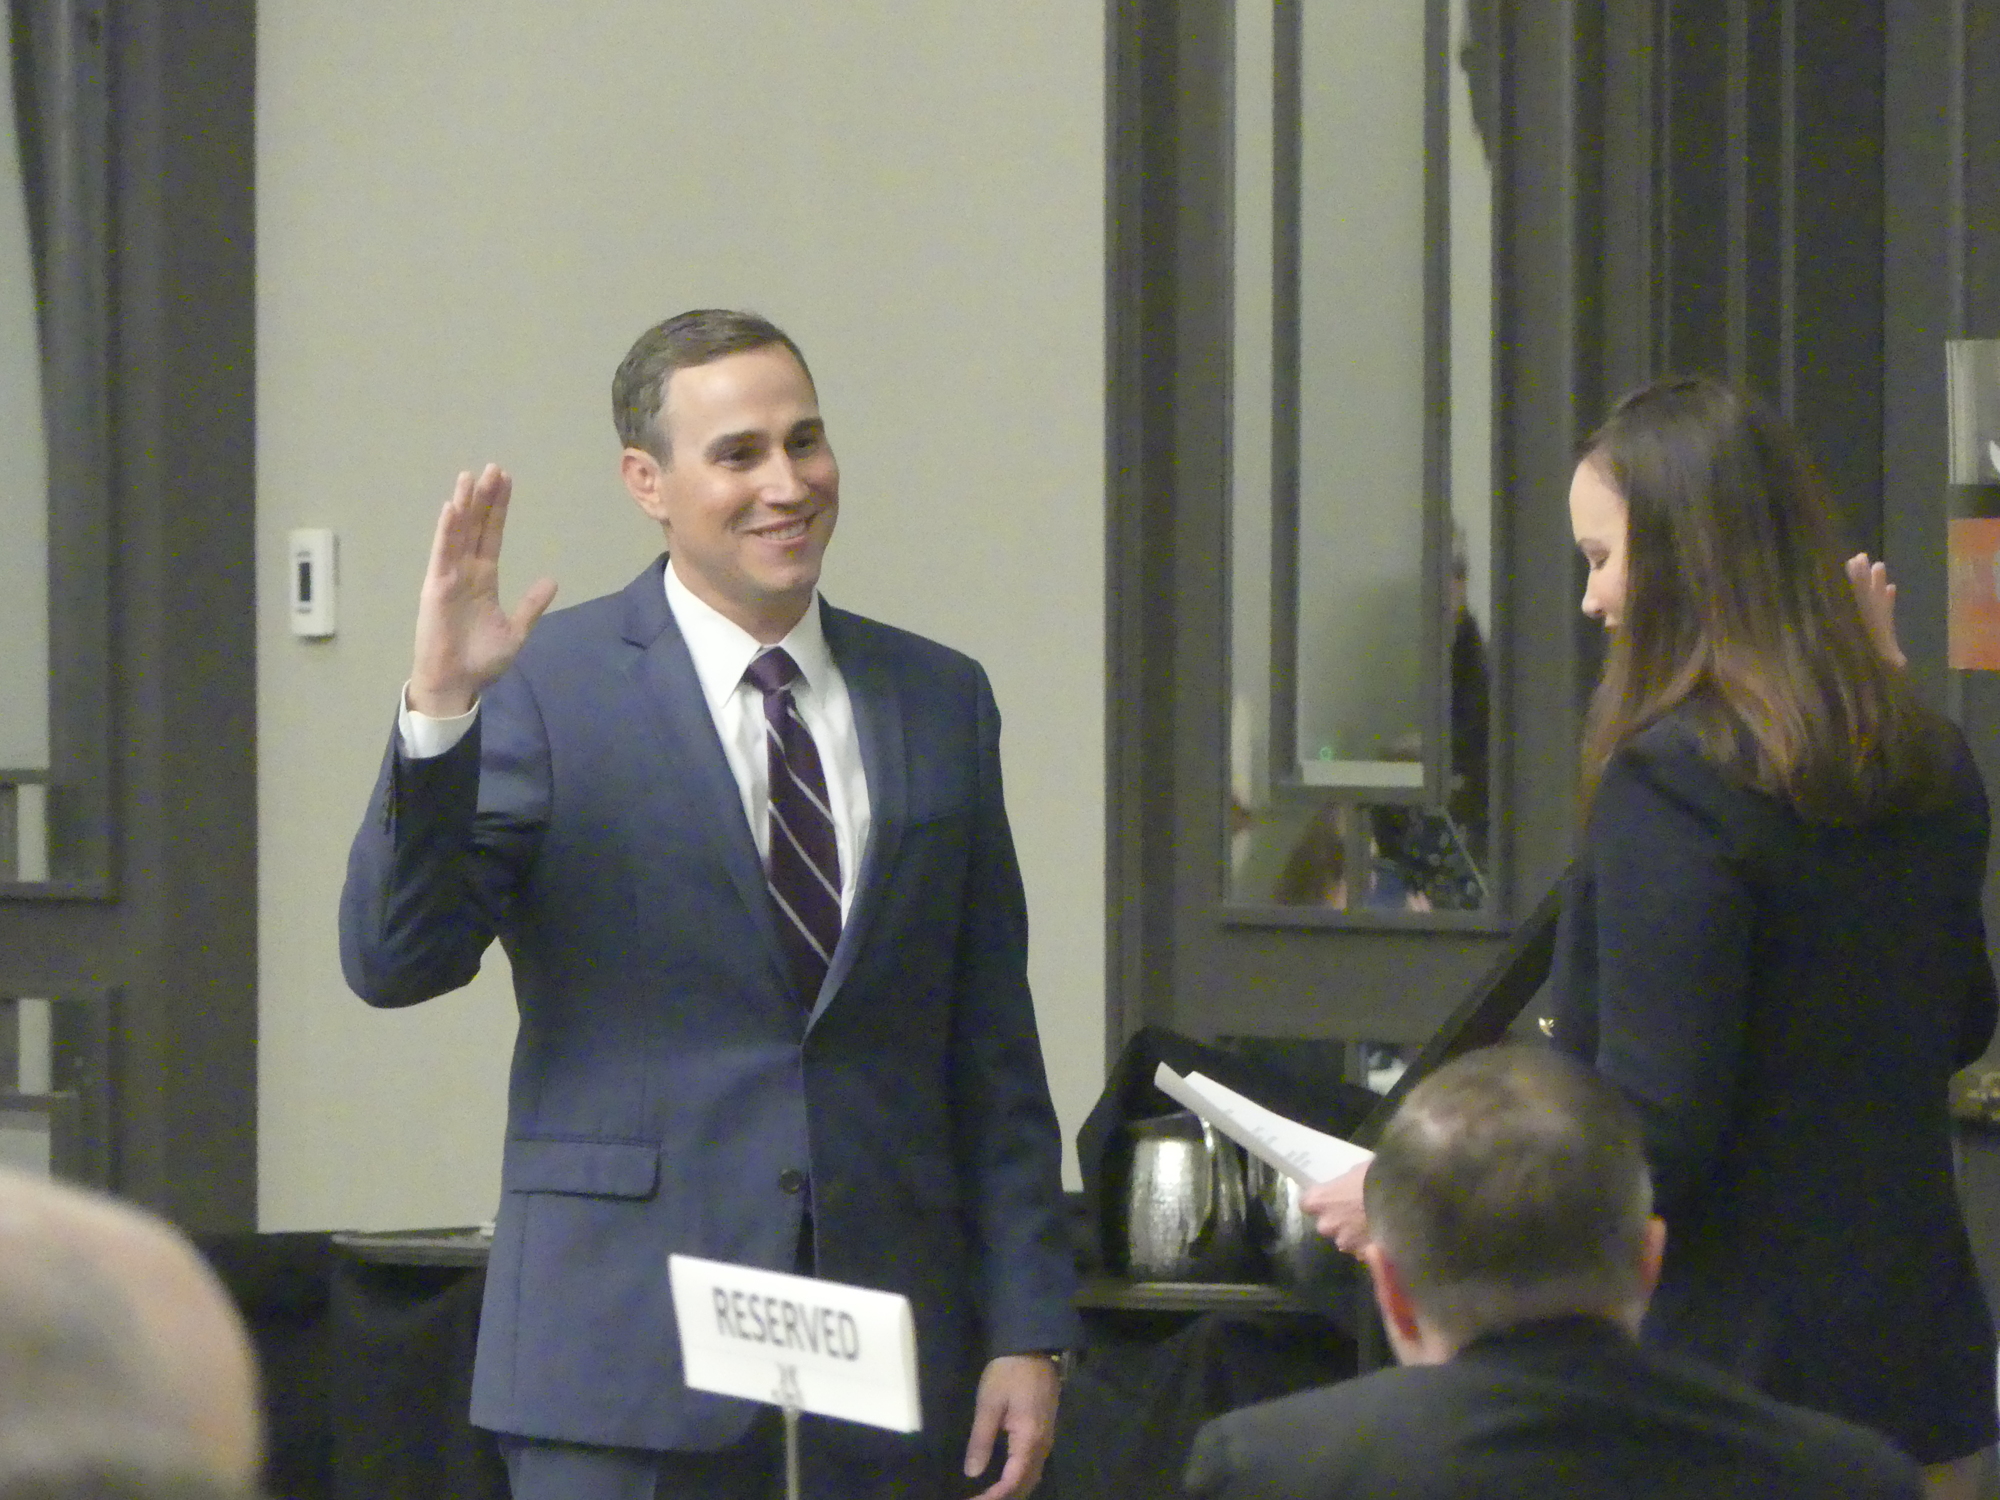 State Attorney General Ashley Moody swore in Michael Fox Orr, managing partner at Orr|Cook, as president of the Jacksonville Bar Association for 2021-22.